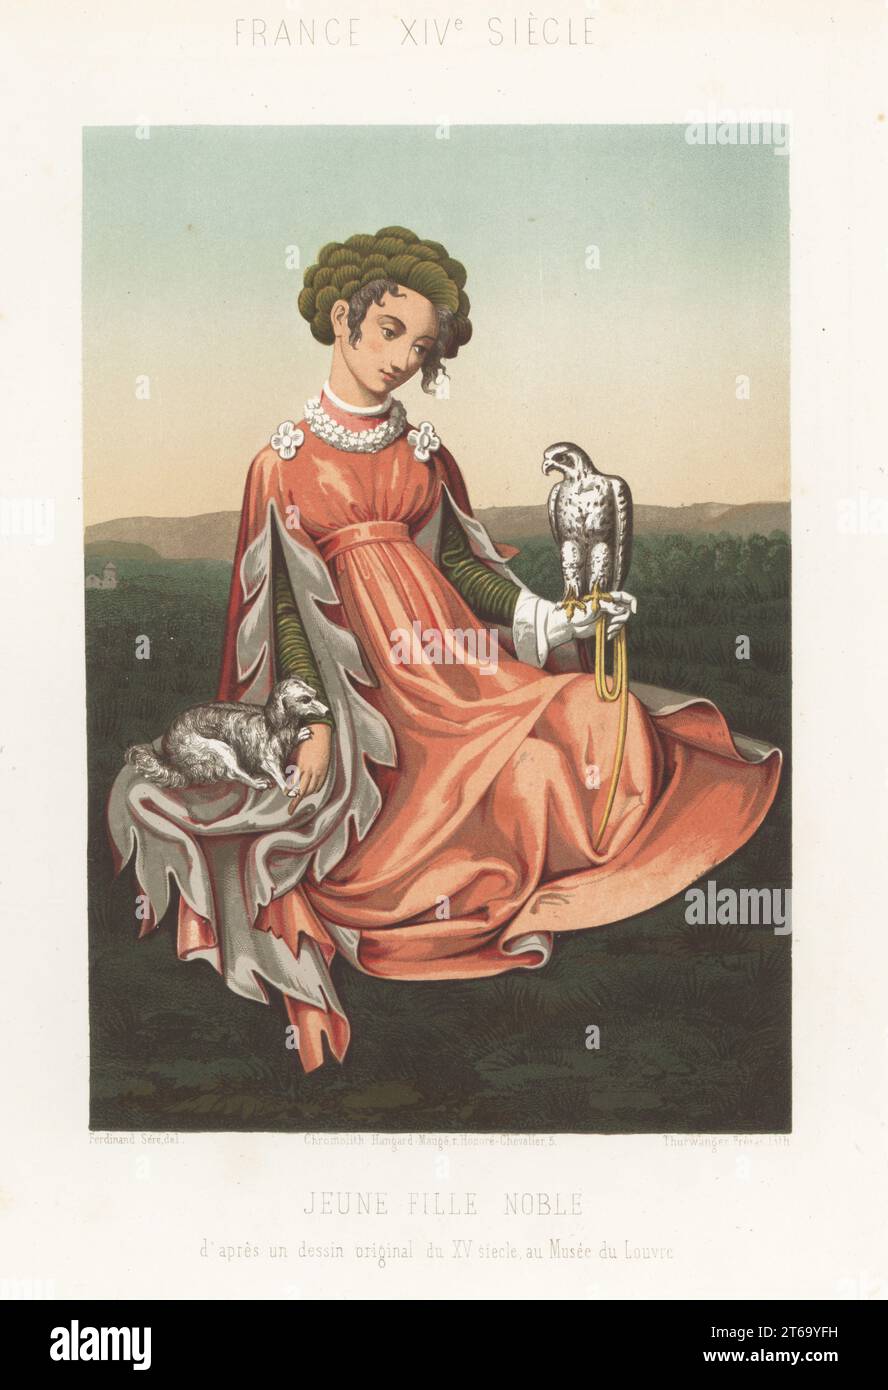 Young noble woman, France, 15th century. With lap dog and falcon. In gown with long slashed sleeves called angel sleeves or manches a l'ange. From an original dessin in the Louvre by an unknown artist. Jeune fille noble, France, XVe siecle. Chromolithograph by the Thurwanger brothers after an illustration by Ferdinand Sere from Charles Louandres Les Arts Somptuaires, The Sumptuary Arts, Hangard-Mauge, Paris, 1858. Stock Photo